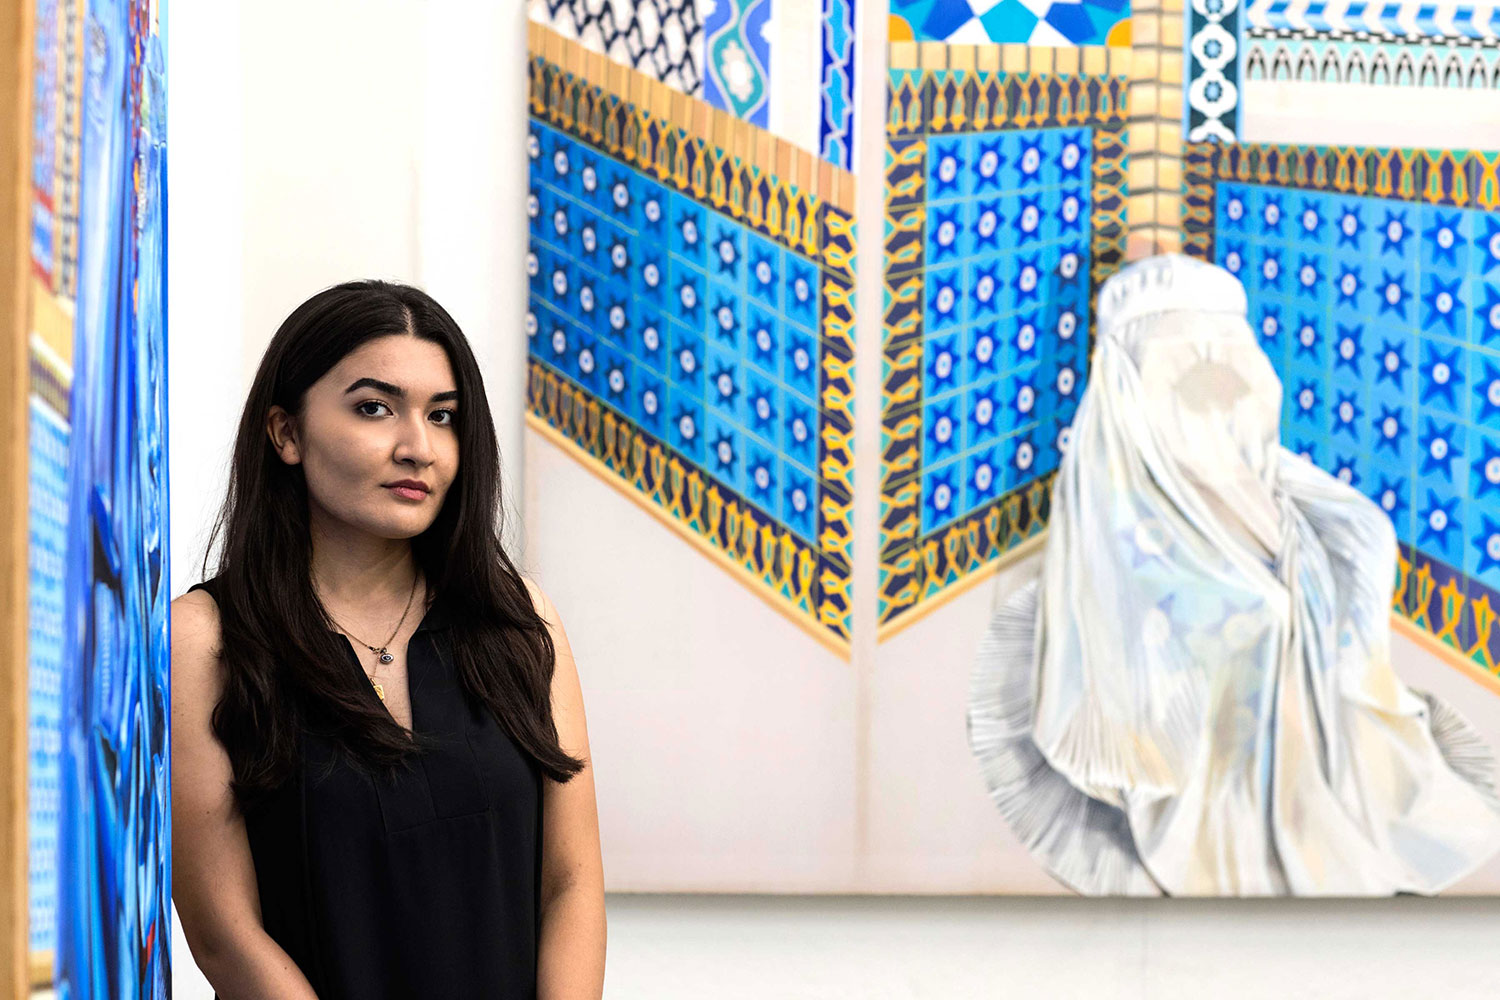 Zuhal Feraidon standing next to a painting looking at the camera